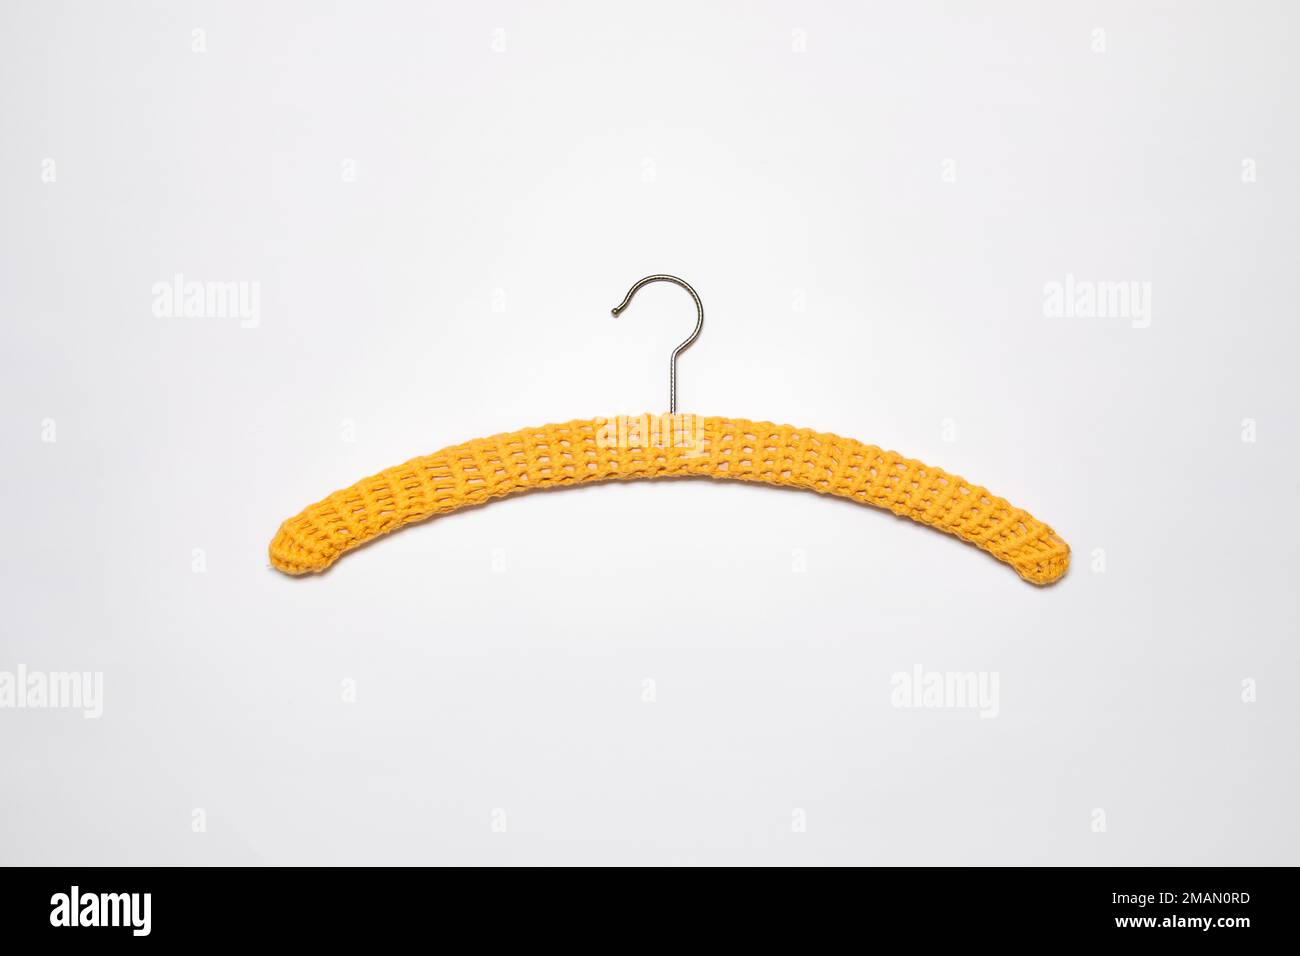 Recycled yellow hanger covered with crochet work. Crocheted shell stitch cloth hanger cover. Slow fashion, circular economy, retro style, renew DIY ho Stock Photo